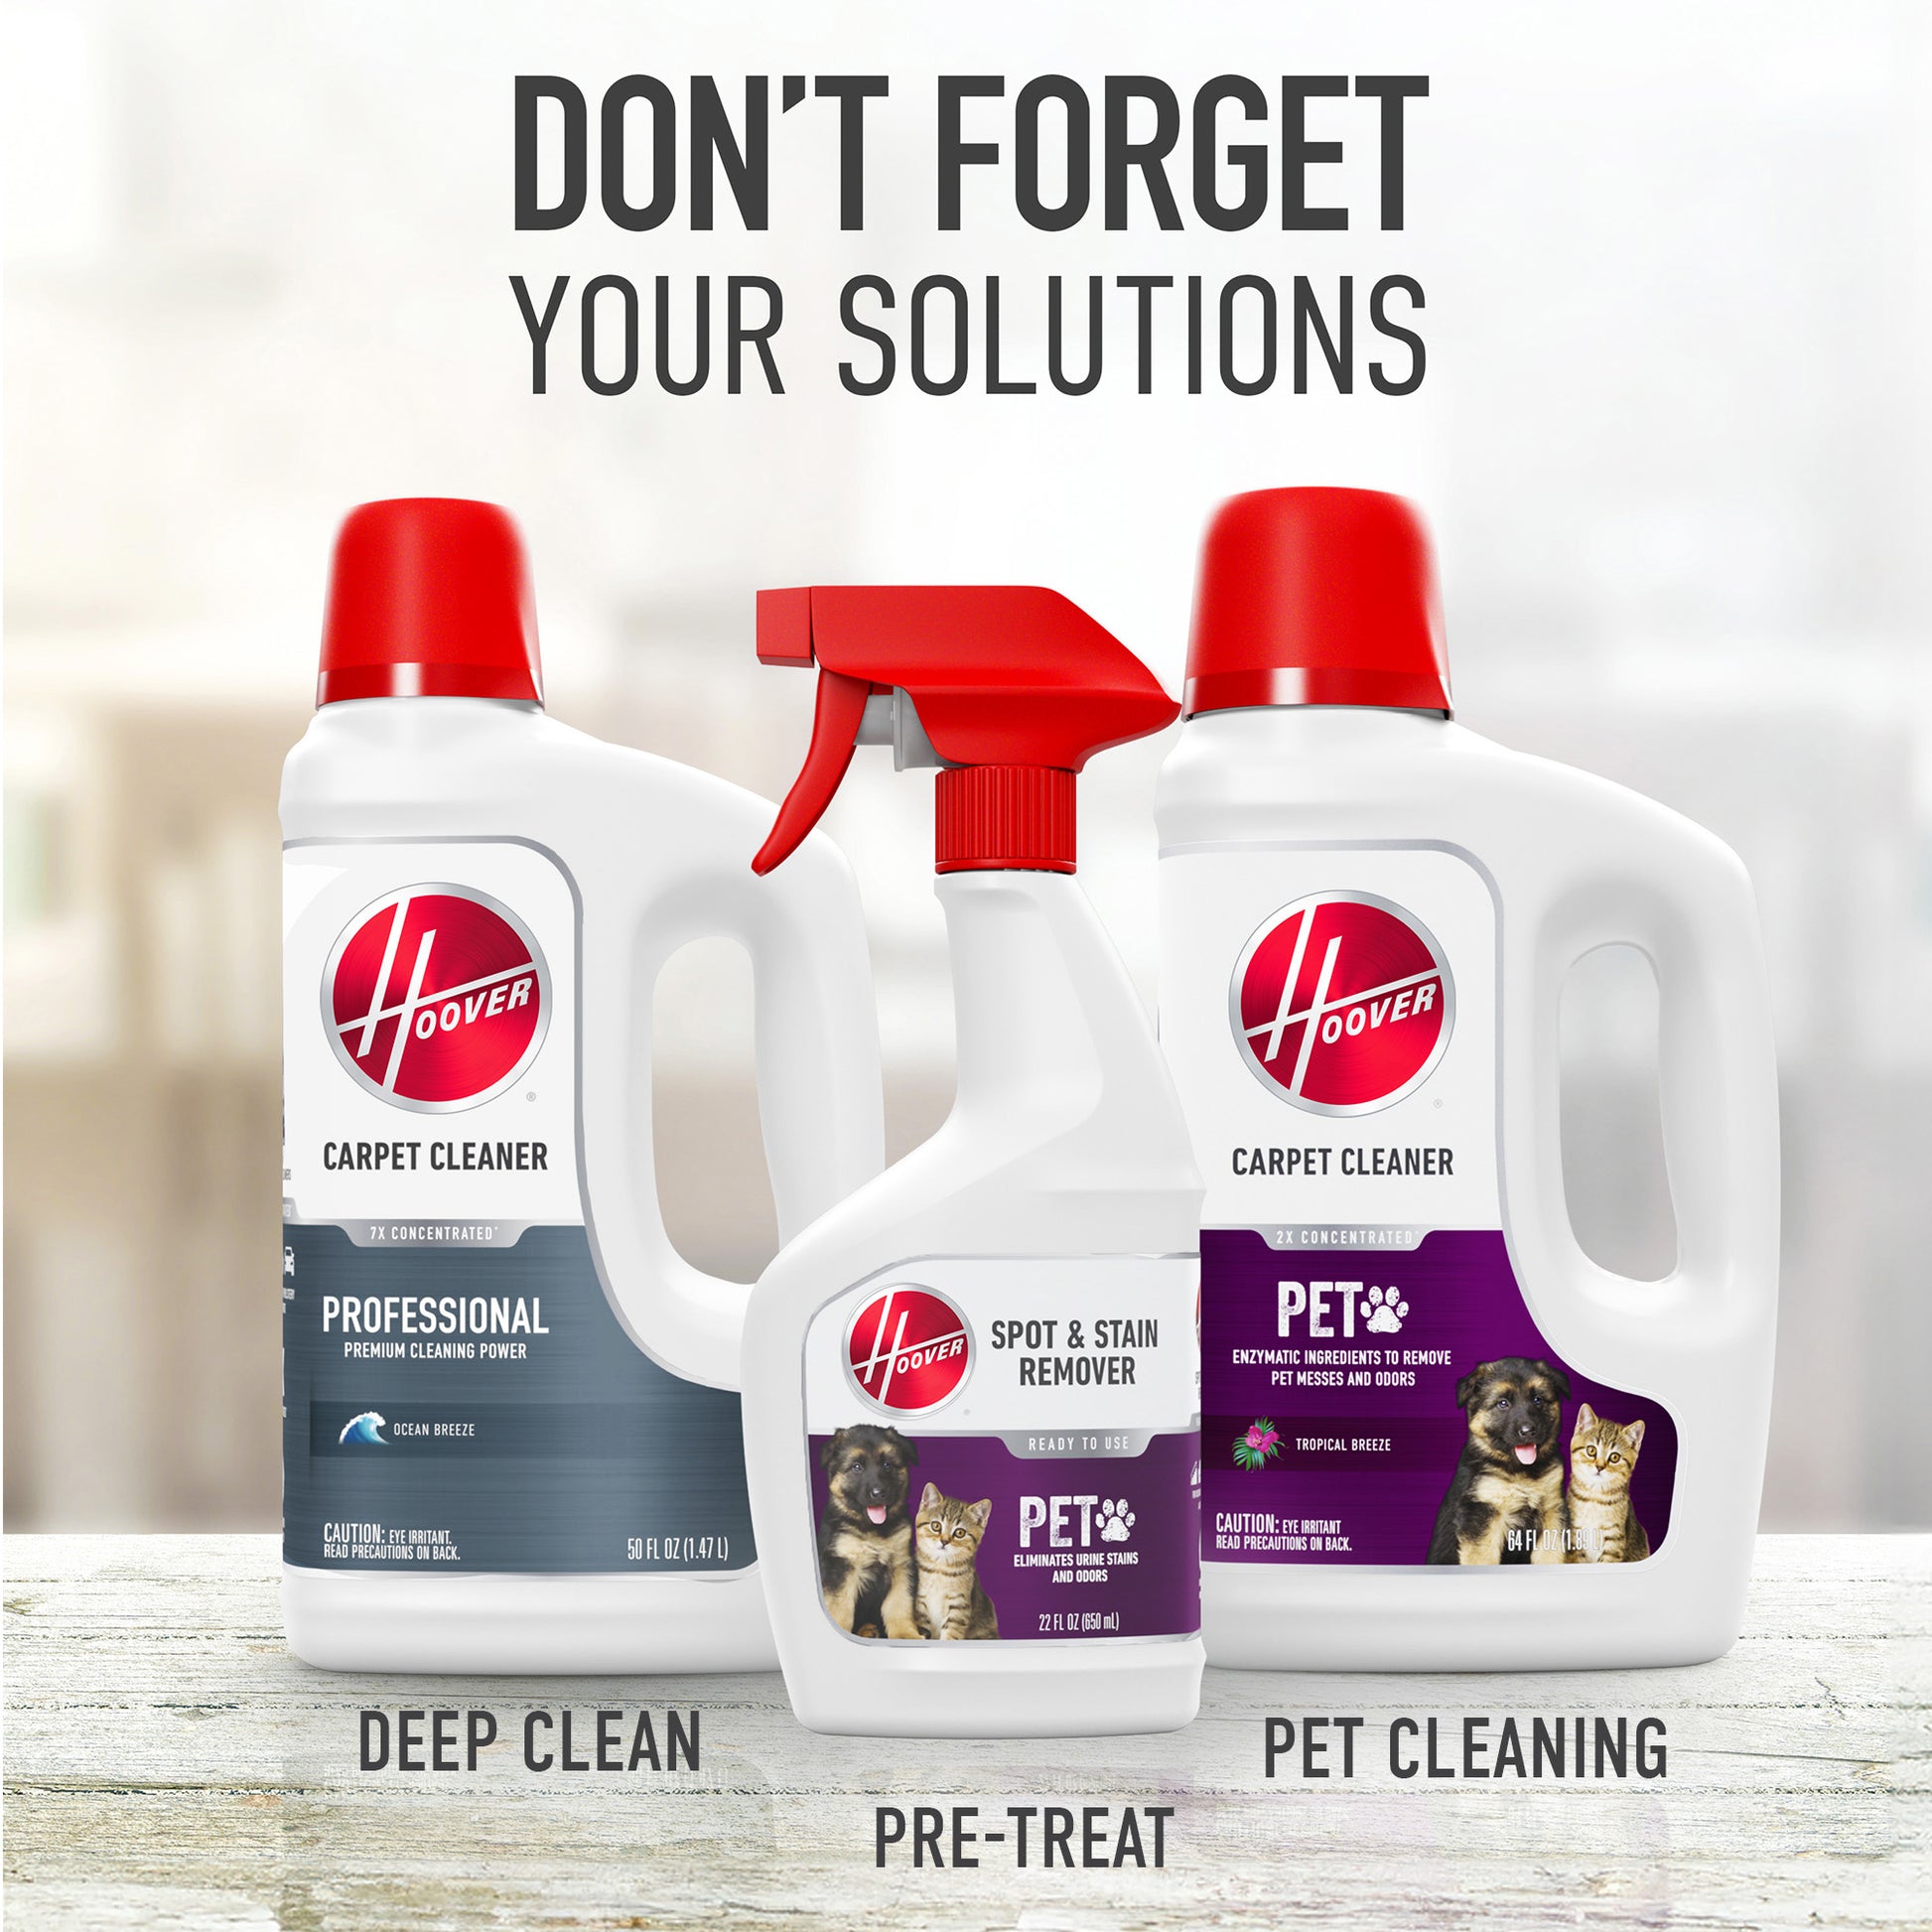 3 Hoover carper cleaner solutions: professional deep clean solution, pet spot and stain remover solution, and Pet cleaning solution.  These are essential cleaning products to buy with your Hoover carpet cleaners